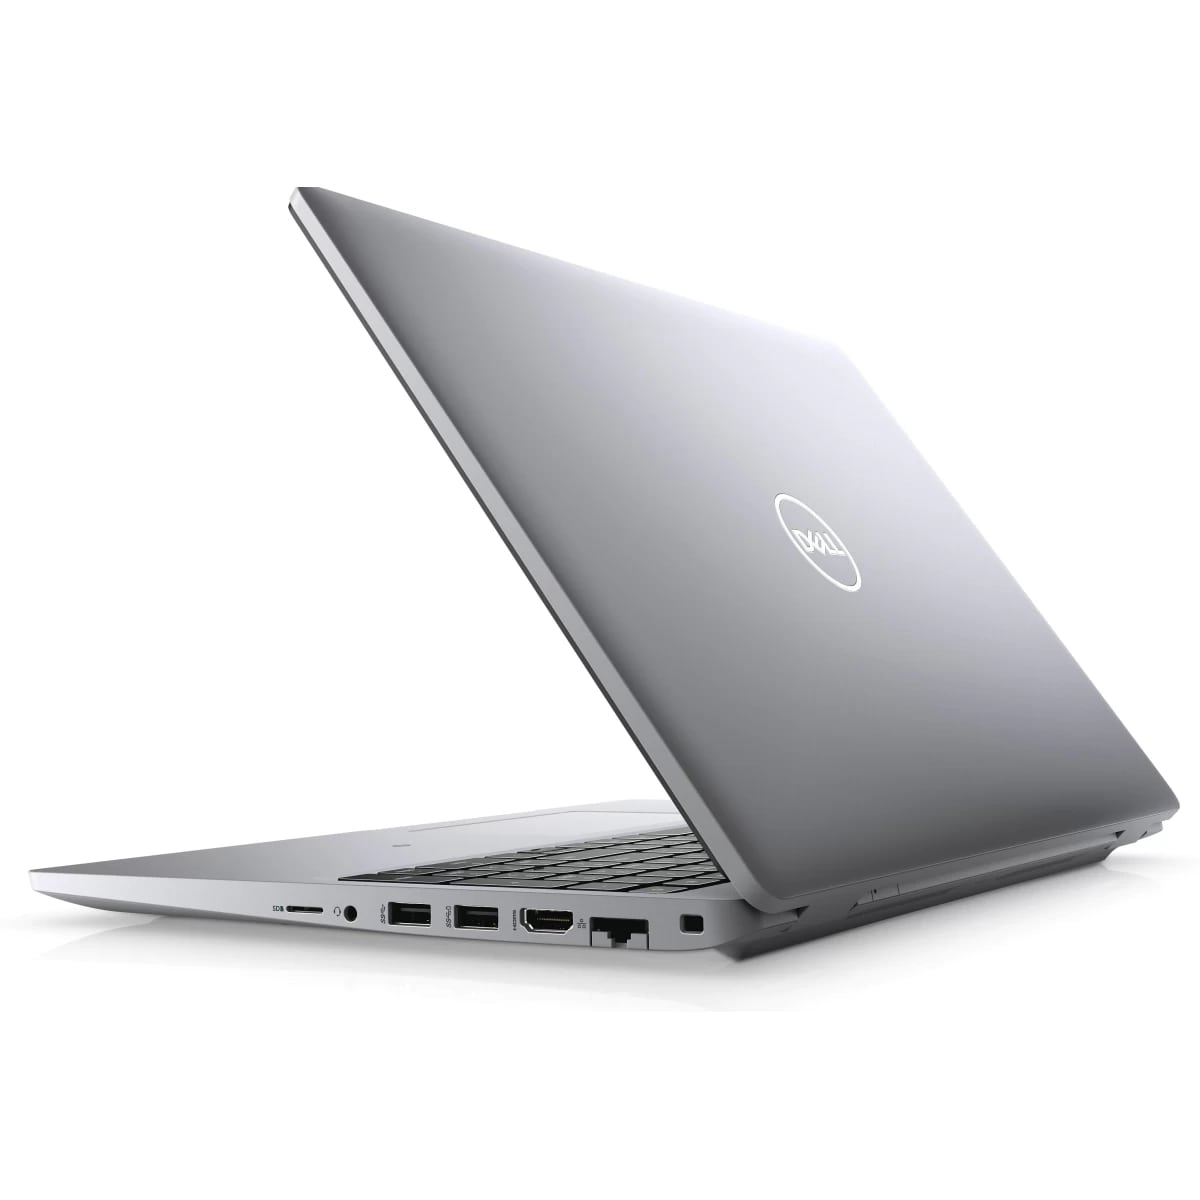 Dell New Latitude 5520 Intel Core i5 11Gen up to 4.2Ghz 4-Cores 8M Cash, 16GB DDR4 RAM